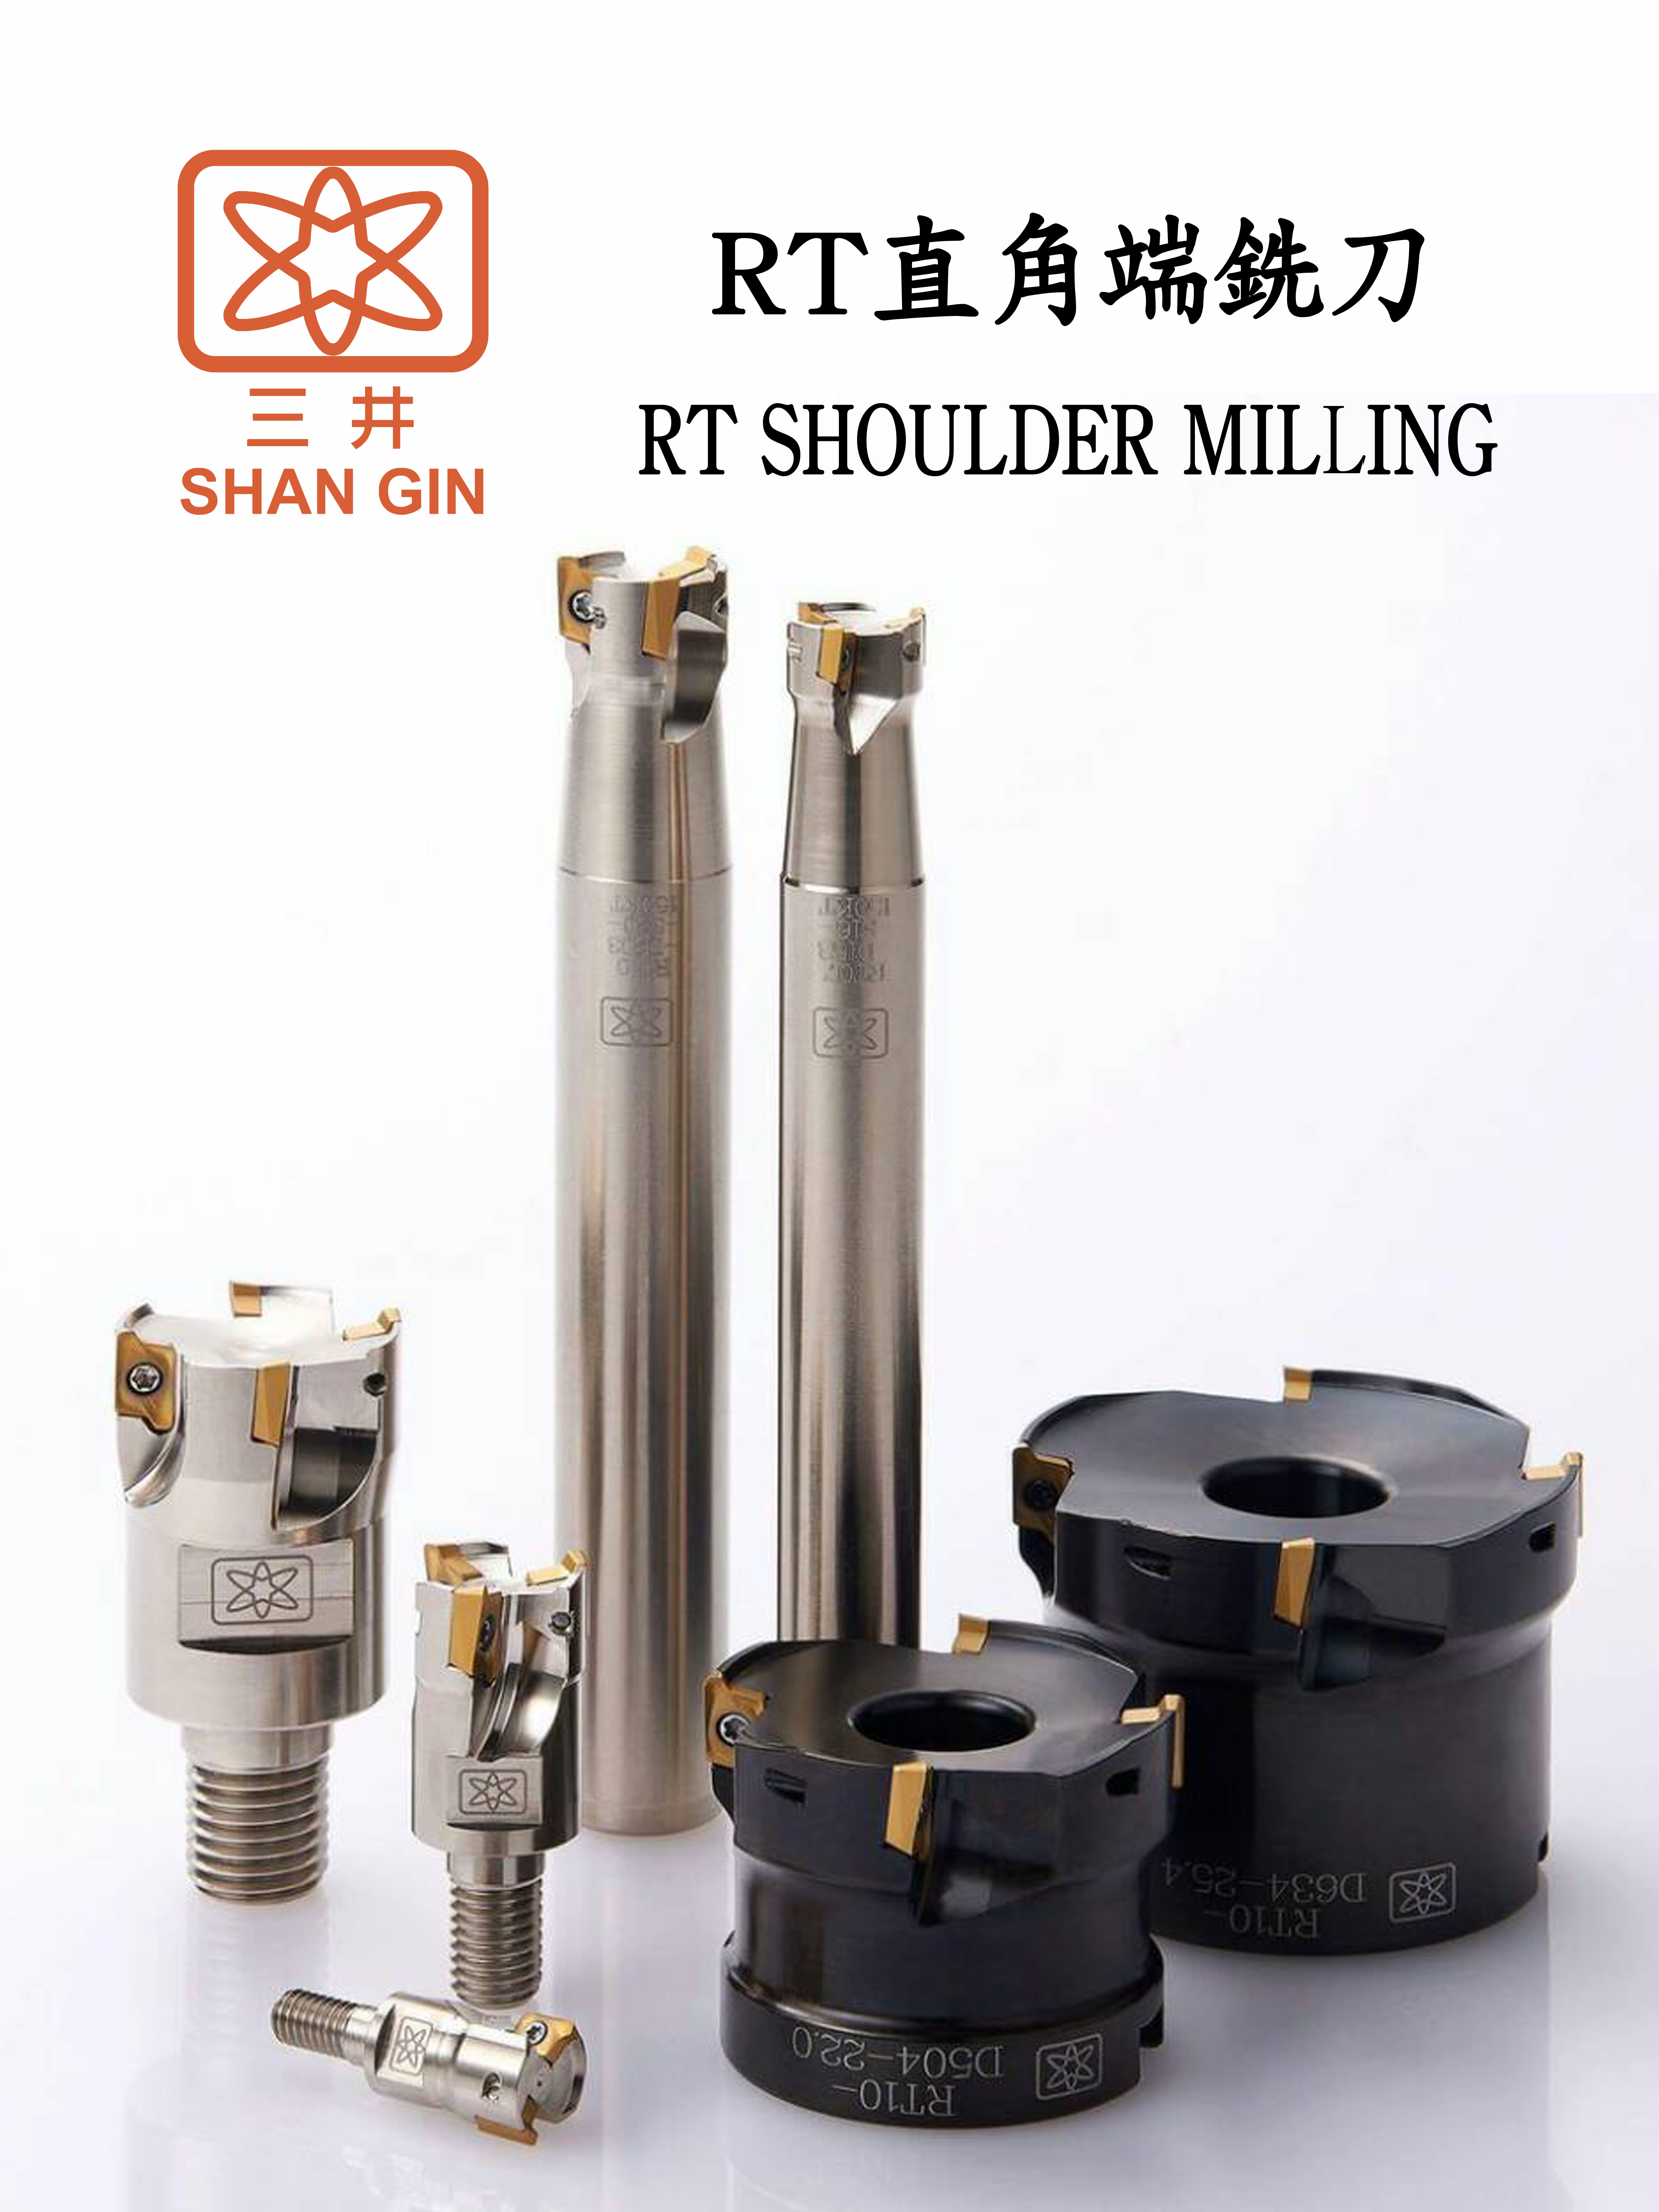 Products|RT SHOULDER MILLING